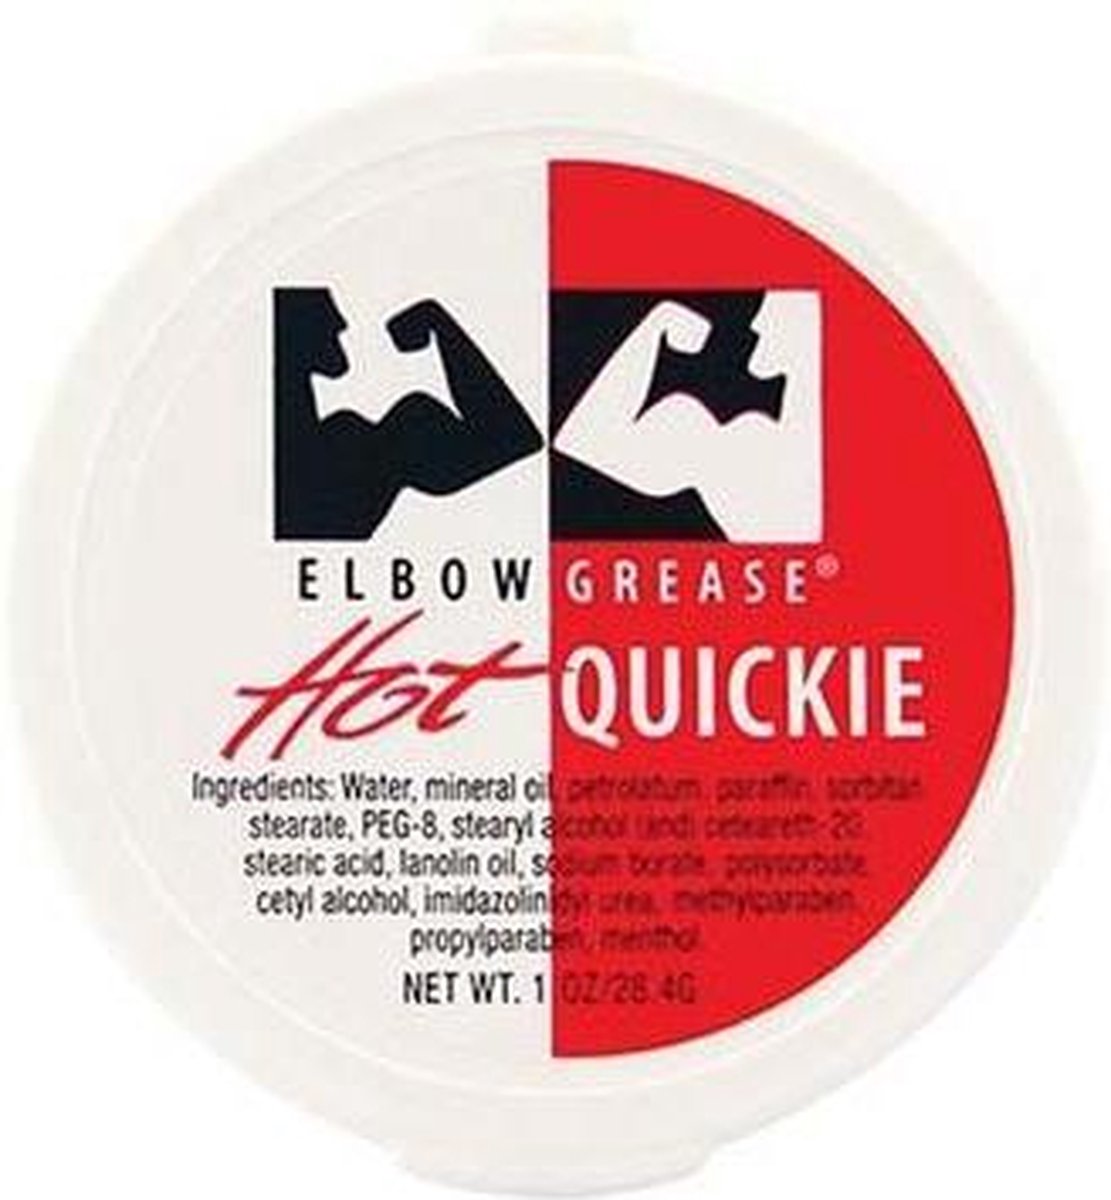 Elbow grease hot quickie 30 ml